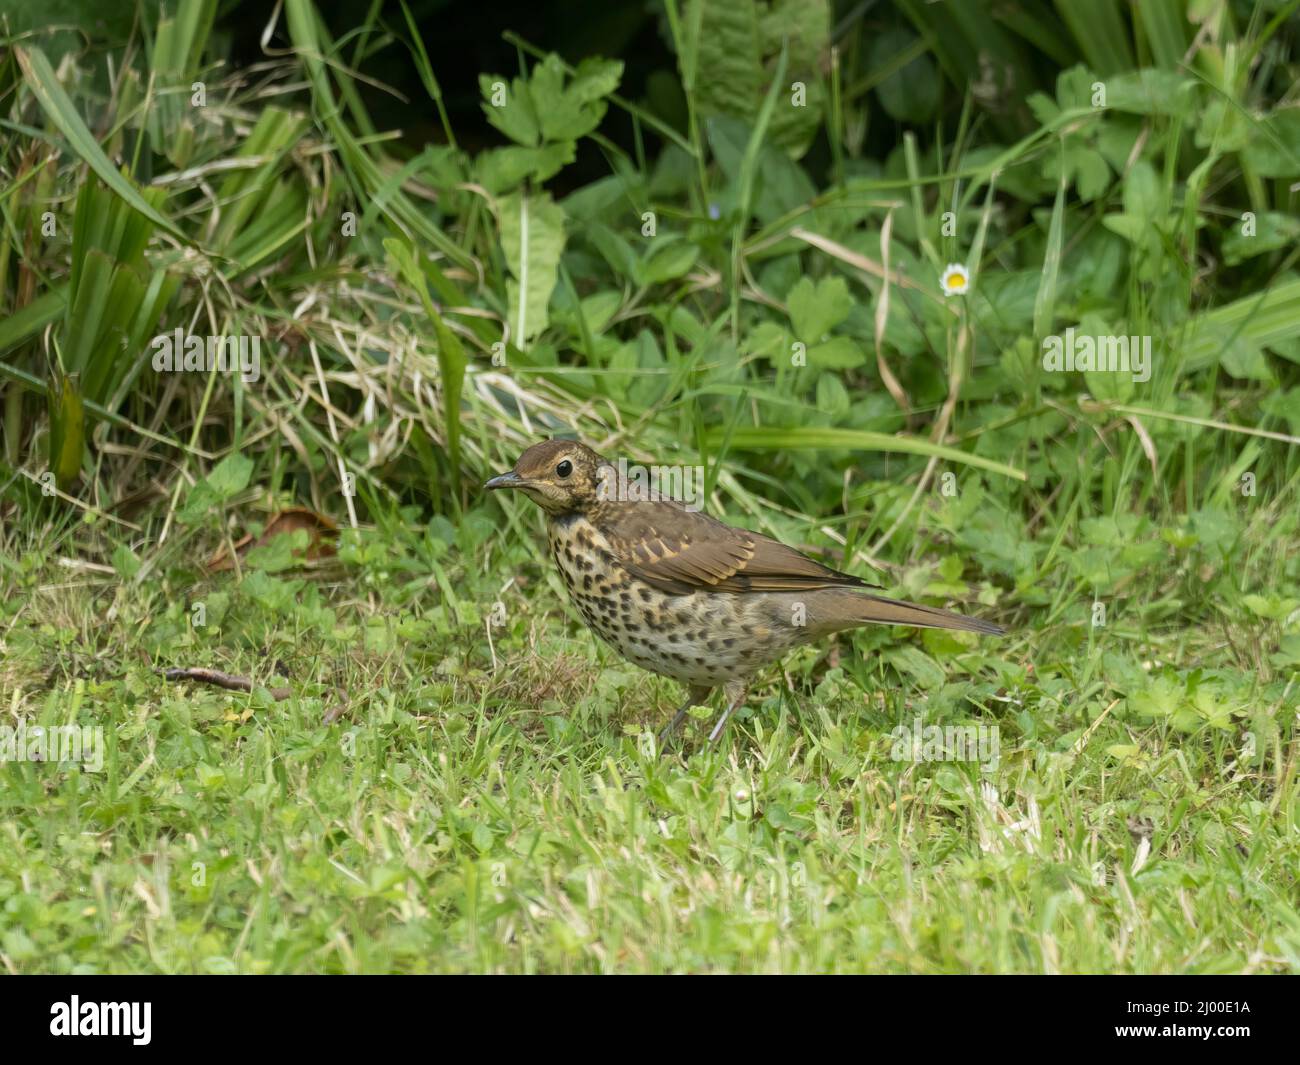 Song Thrush, Turdus philomelos, single juvenile standing on grass with Earthworm, Pembrokeshire, Wales, UK. Stock Photo